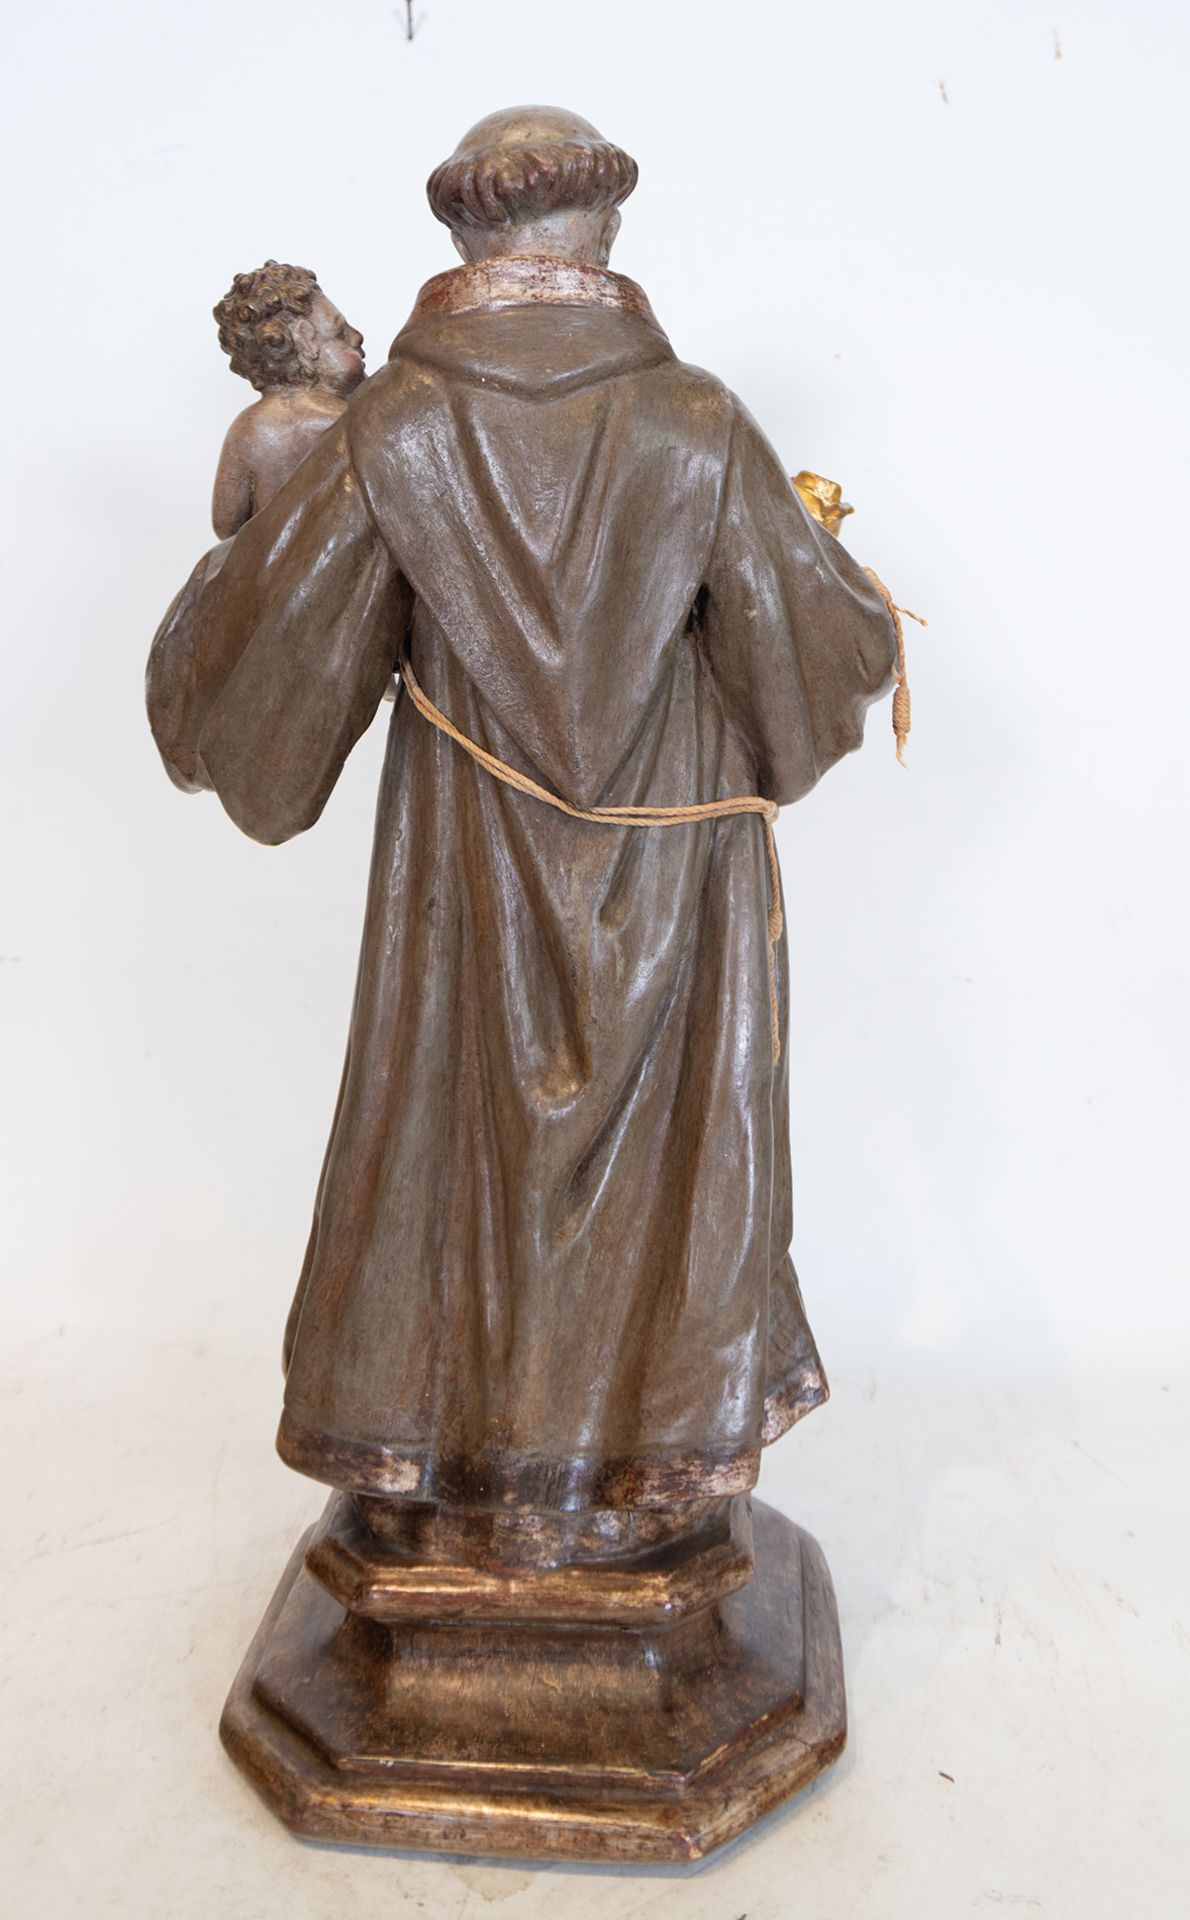 Saint Anthony with the Child in Arms, 18th century Granada school - Image 4 of 4